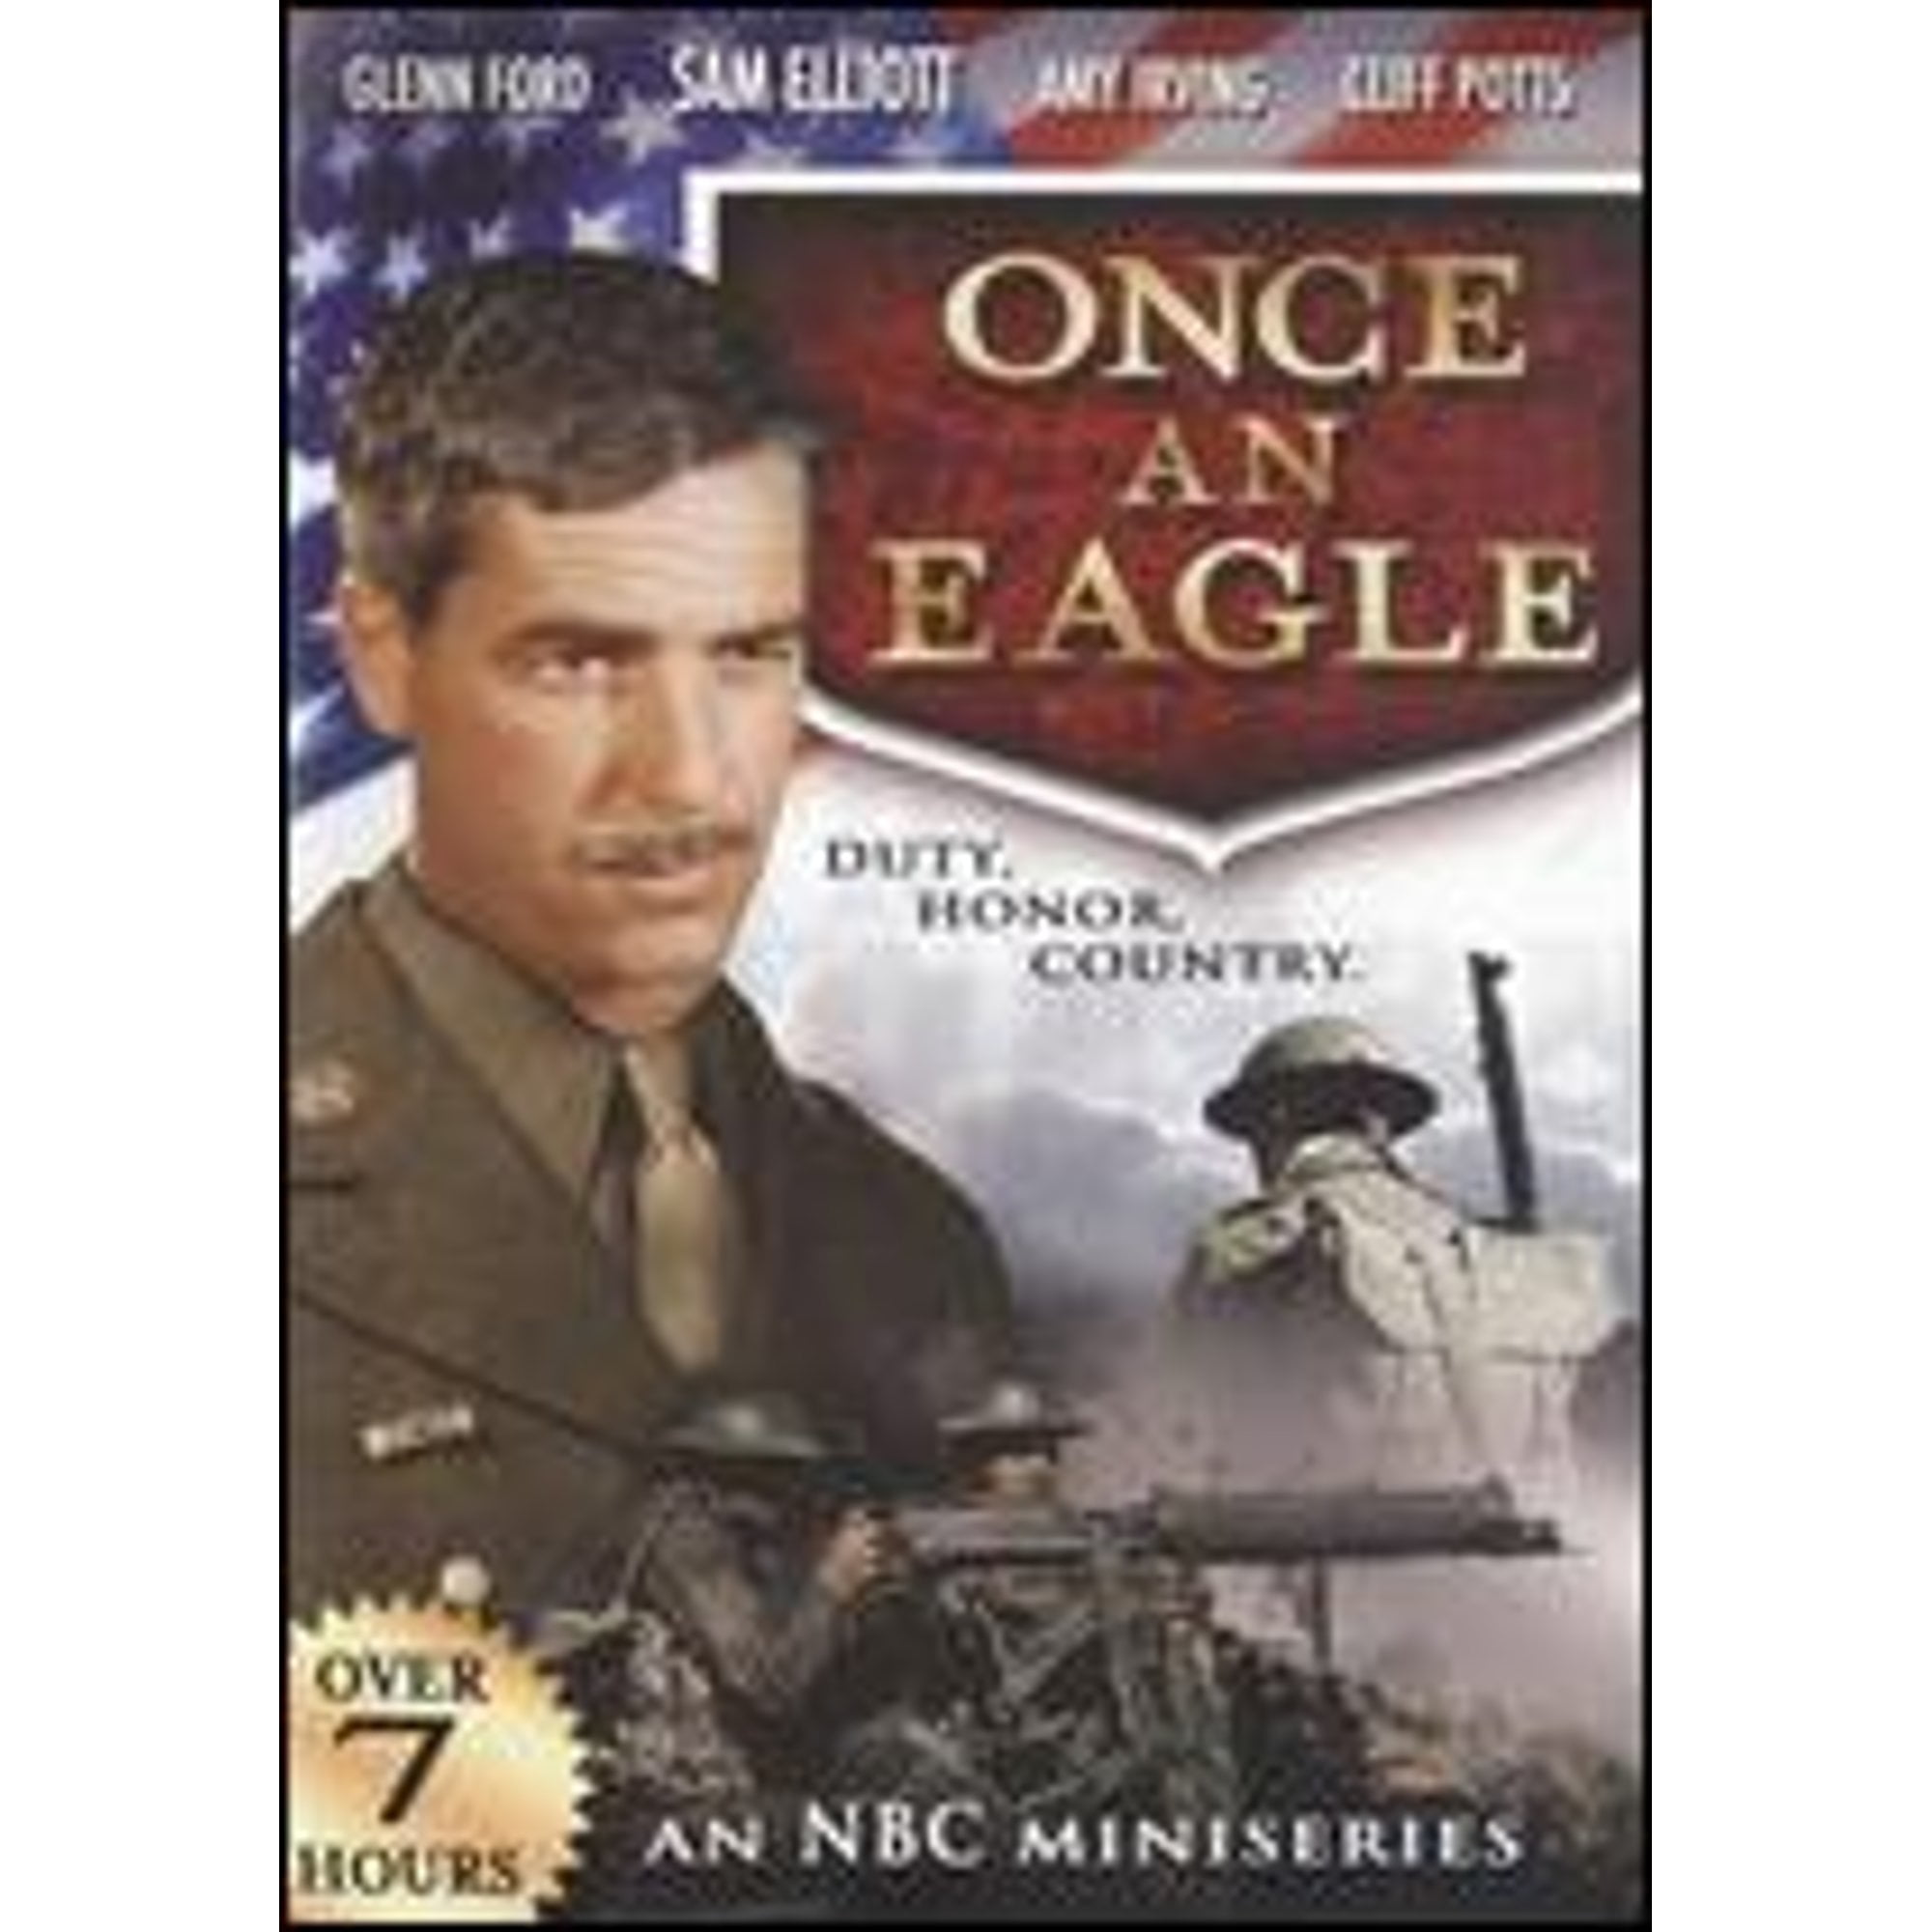 Pre-Owned Once an Eagle (DVD 0011301662354) directed by E.W. Swackhamer, Richard Michaels